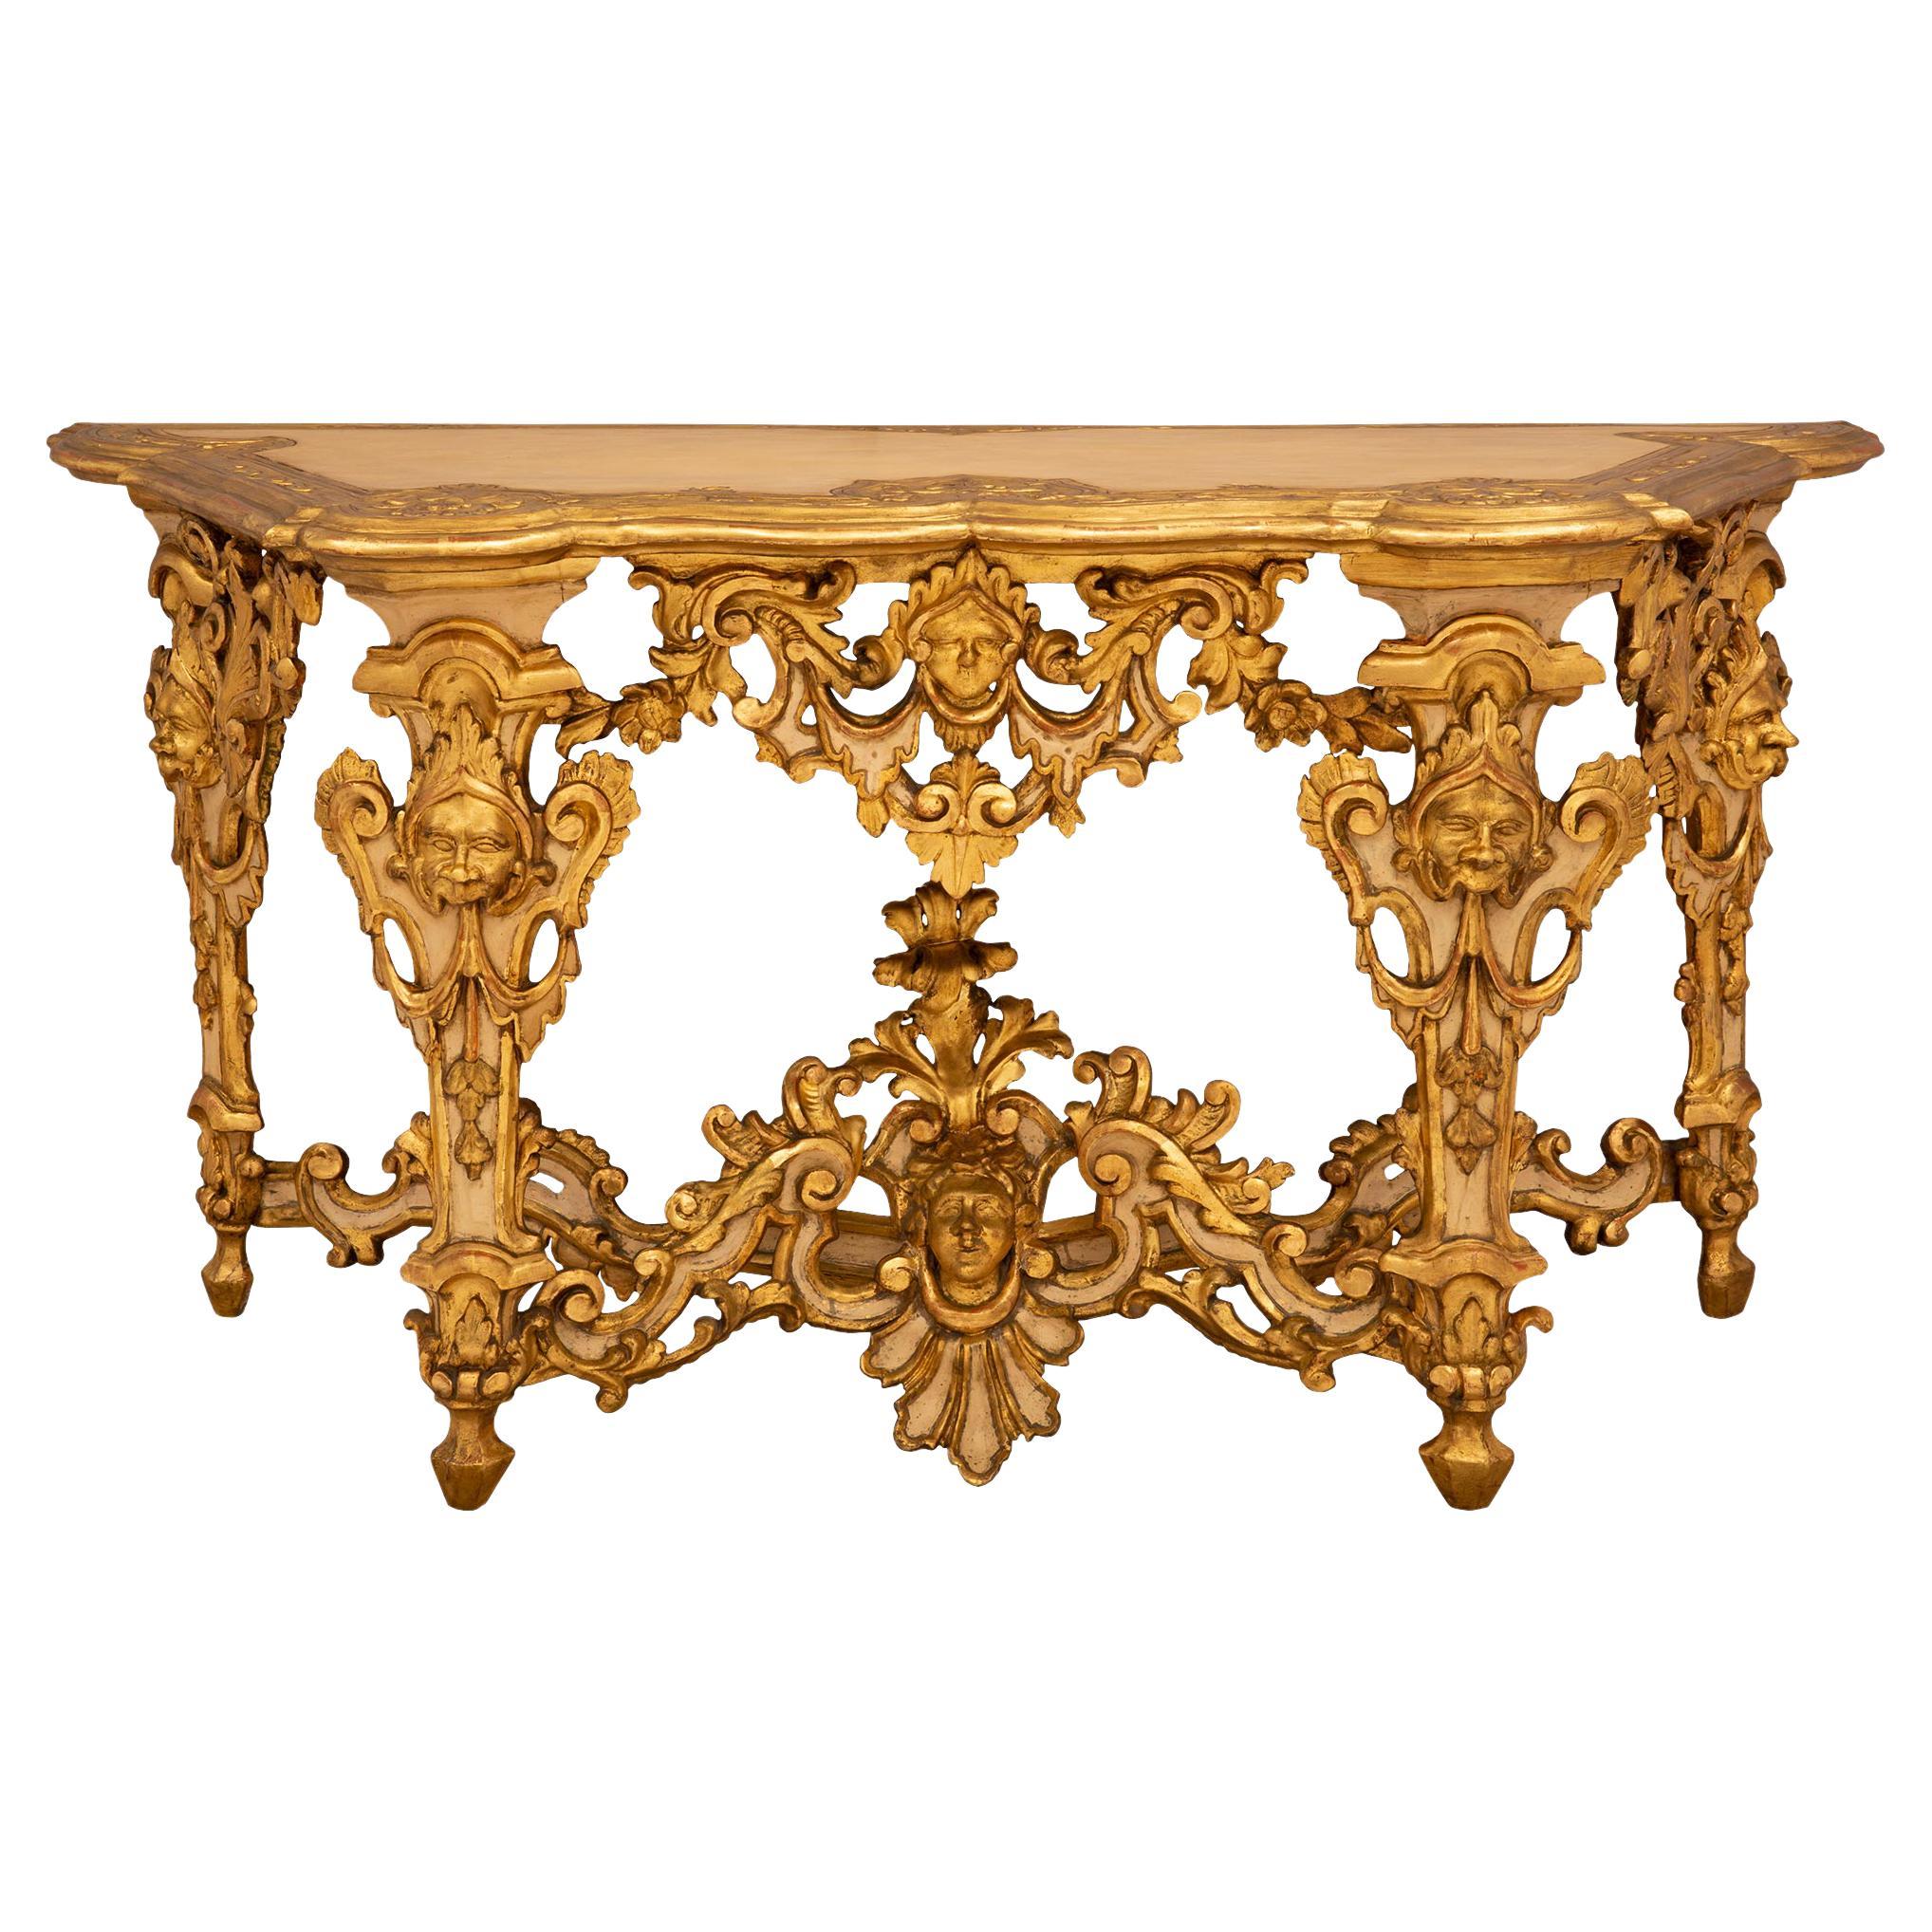 Italian 18th Century Louis XIV Period Giltwood and Patinated Wood Lombardi Conso